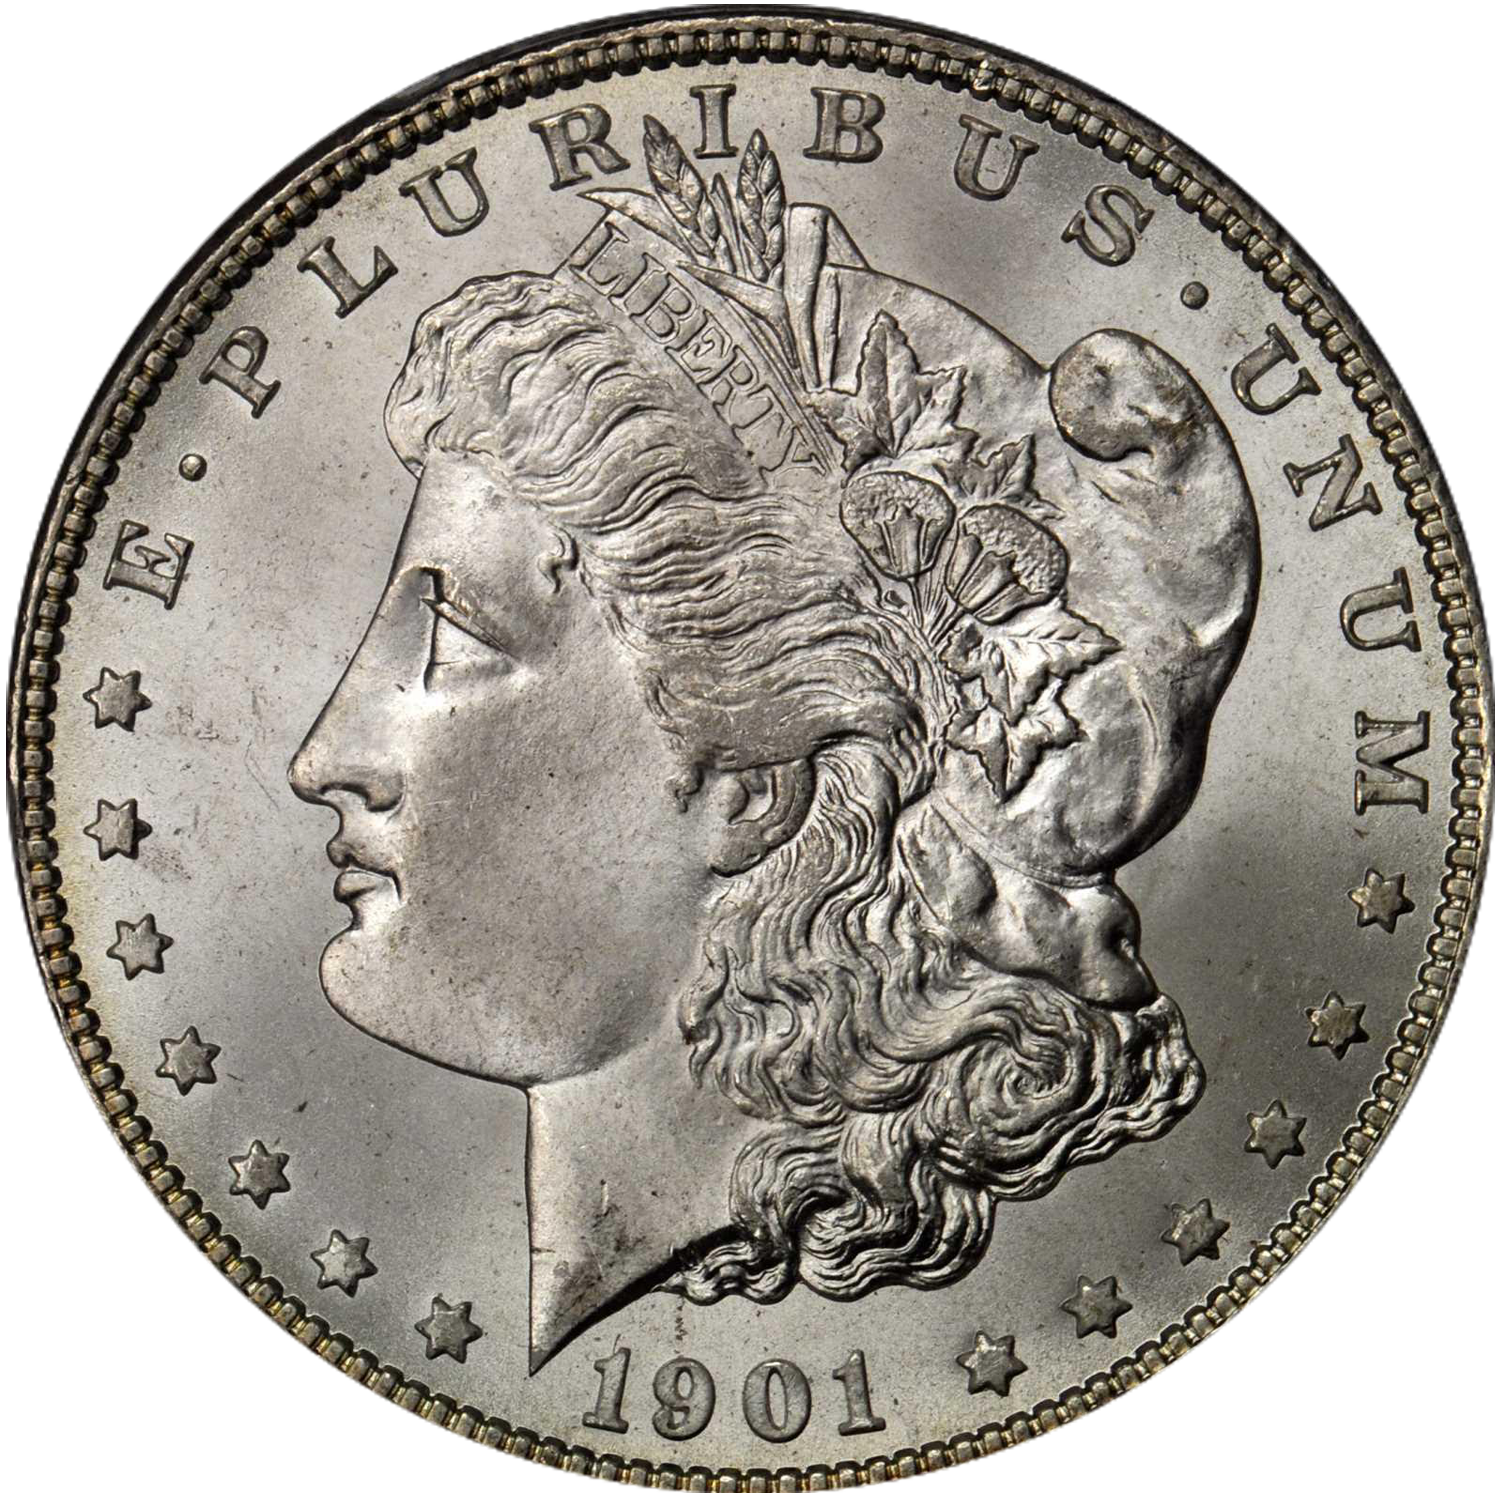 1901 new orleans mint uncirculated morgan silver dollar value